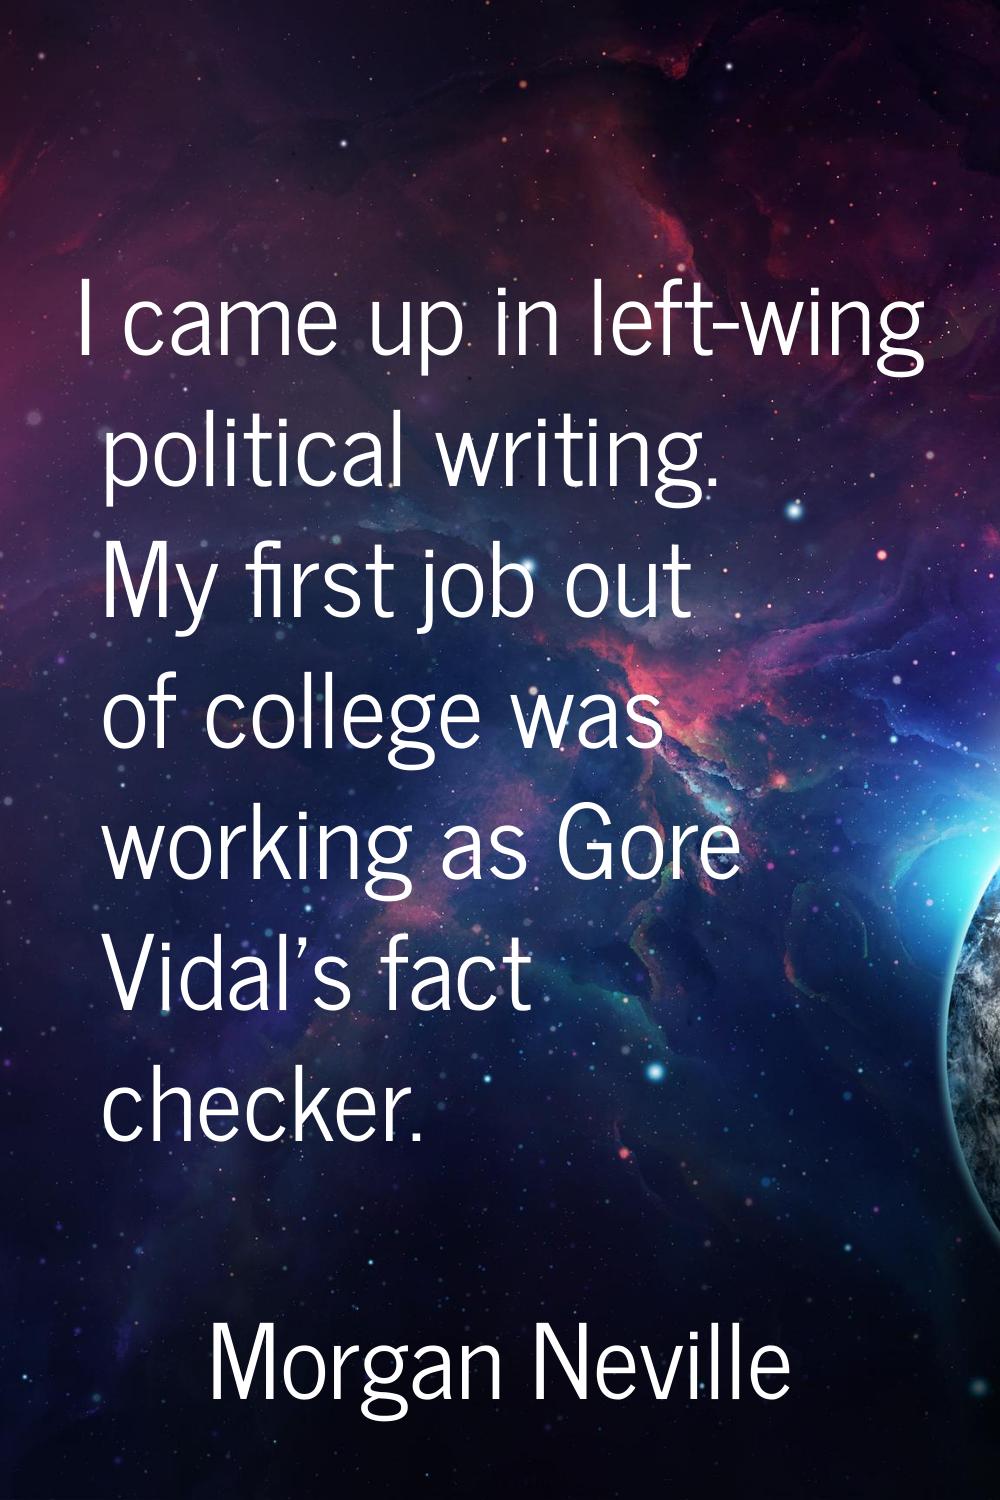 I came up in left-wing political writing. My first job out of college was working as Gore Vidal's f